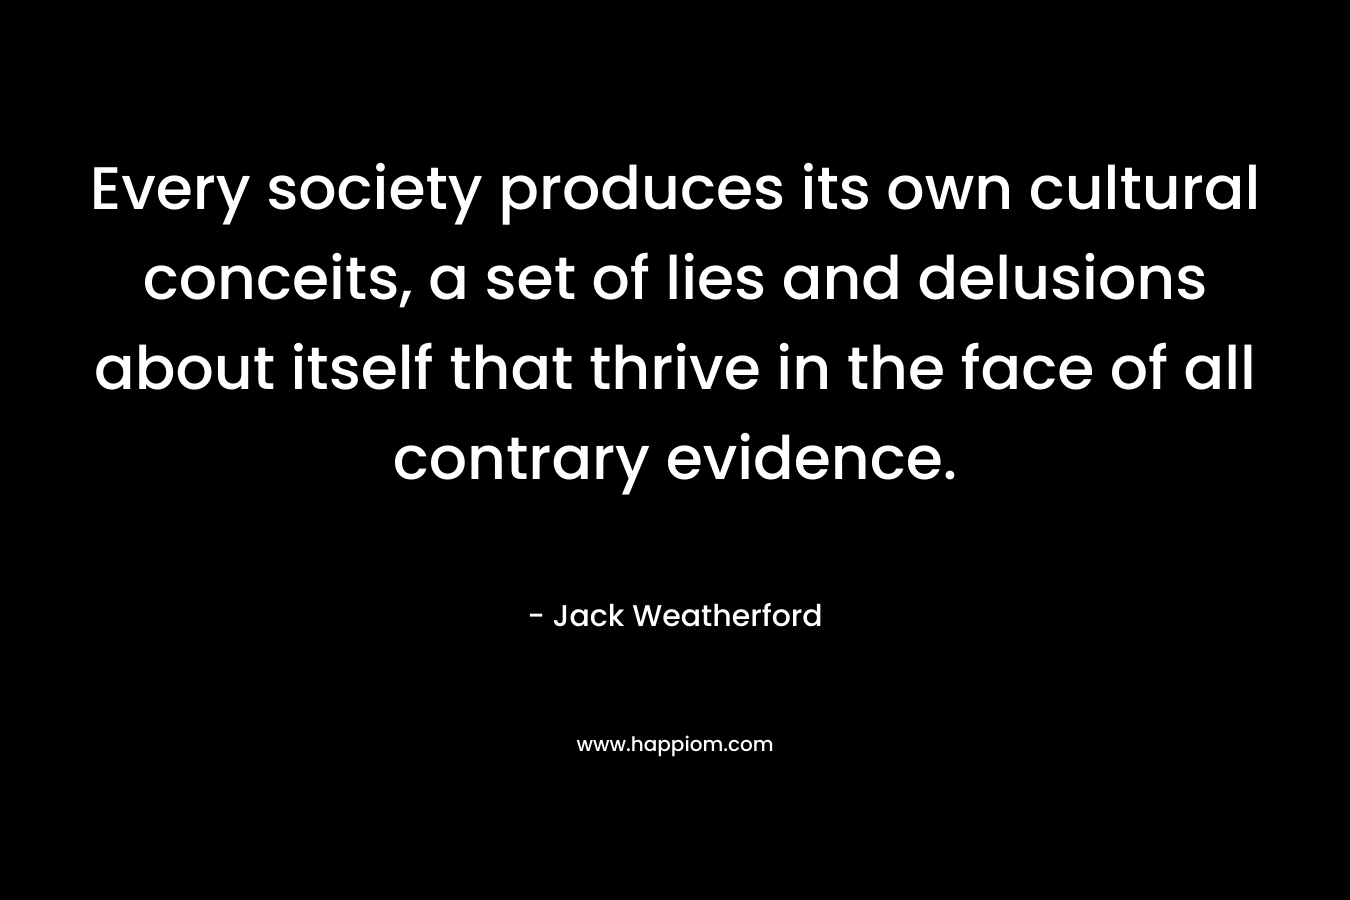 Every society produces its own cultural conceits, a set of lies and delusions about itself that thrive in the face of all contrary evidence. – Jack Weatherford